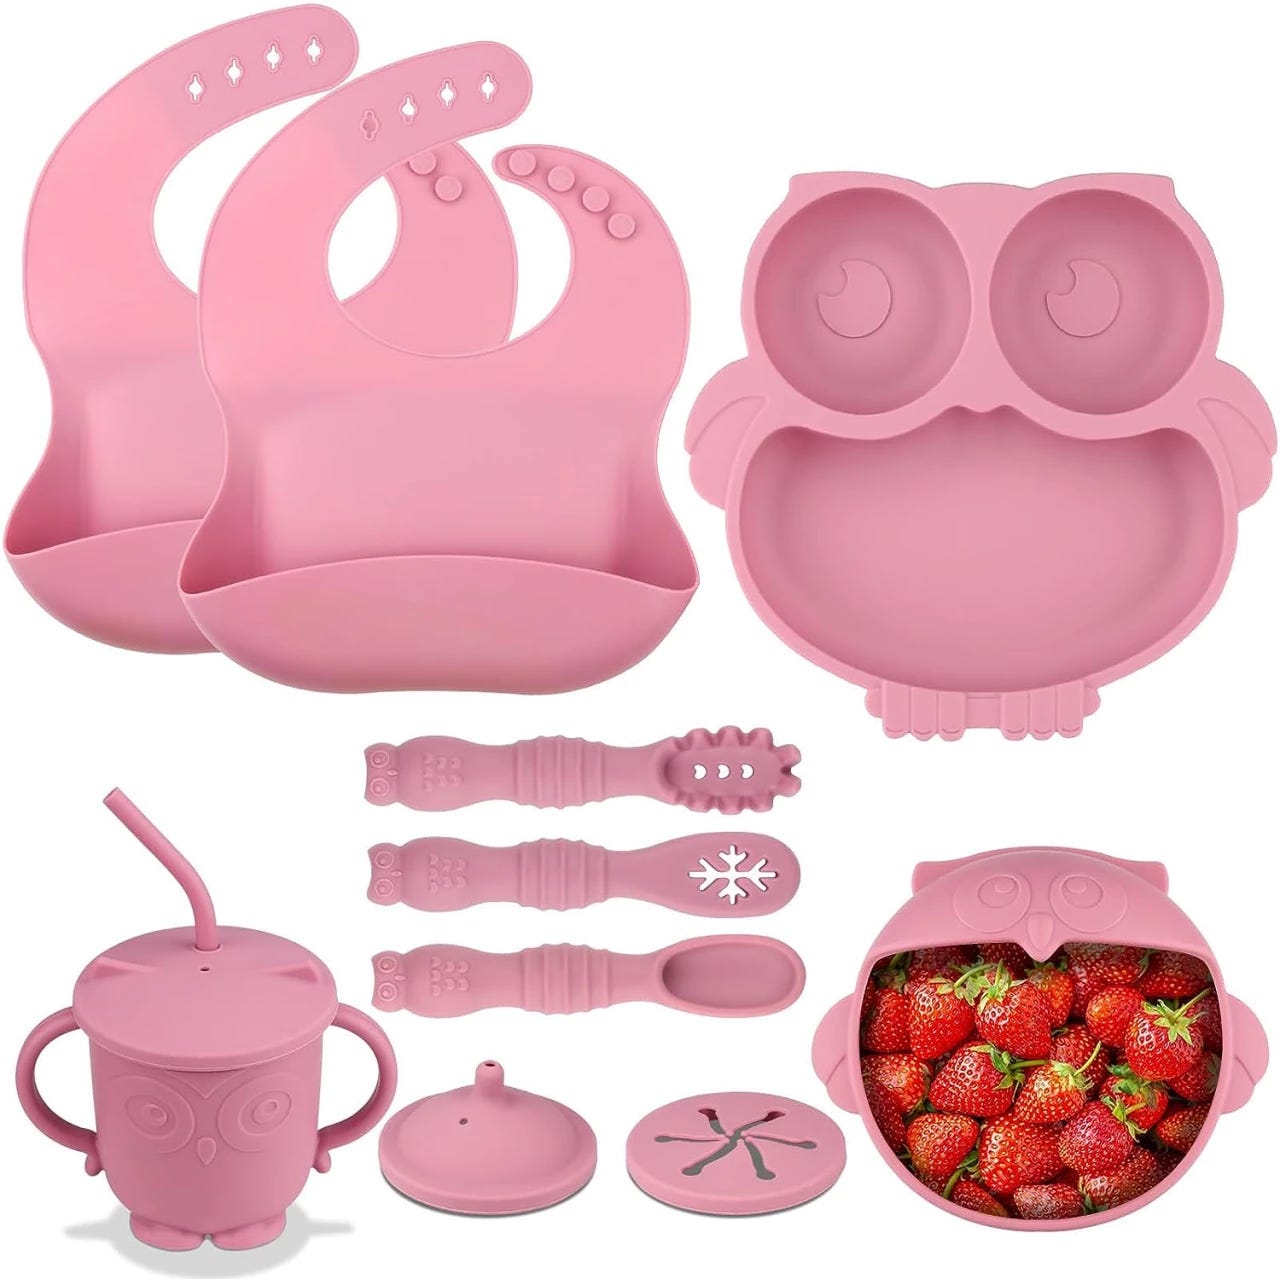 Baby Led Weaning Set With Bibs, Spoons, A Suction Bowl and Suction